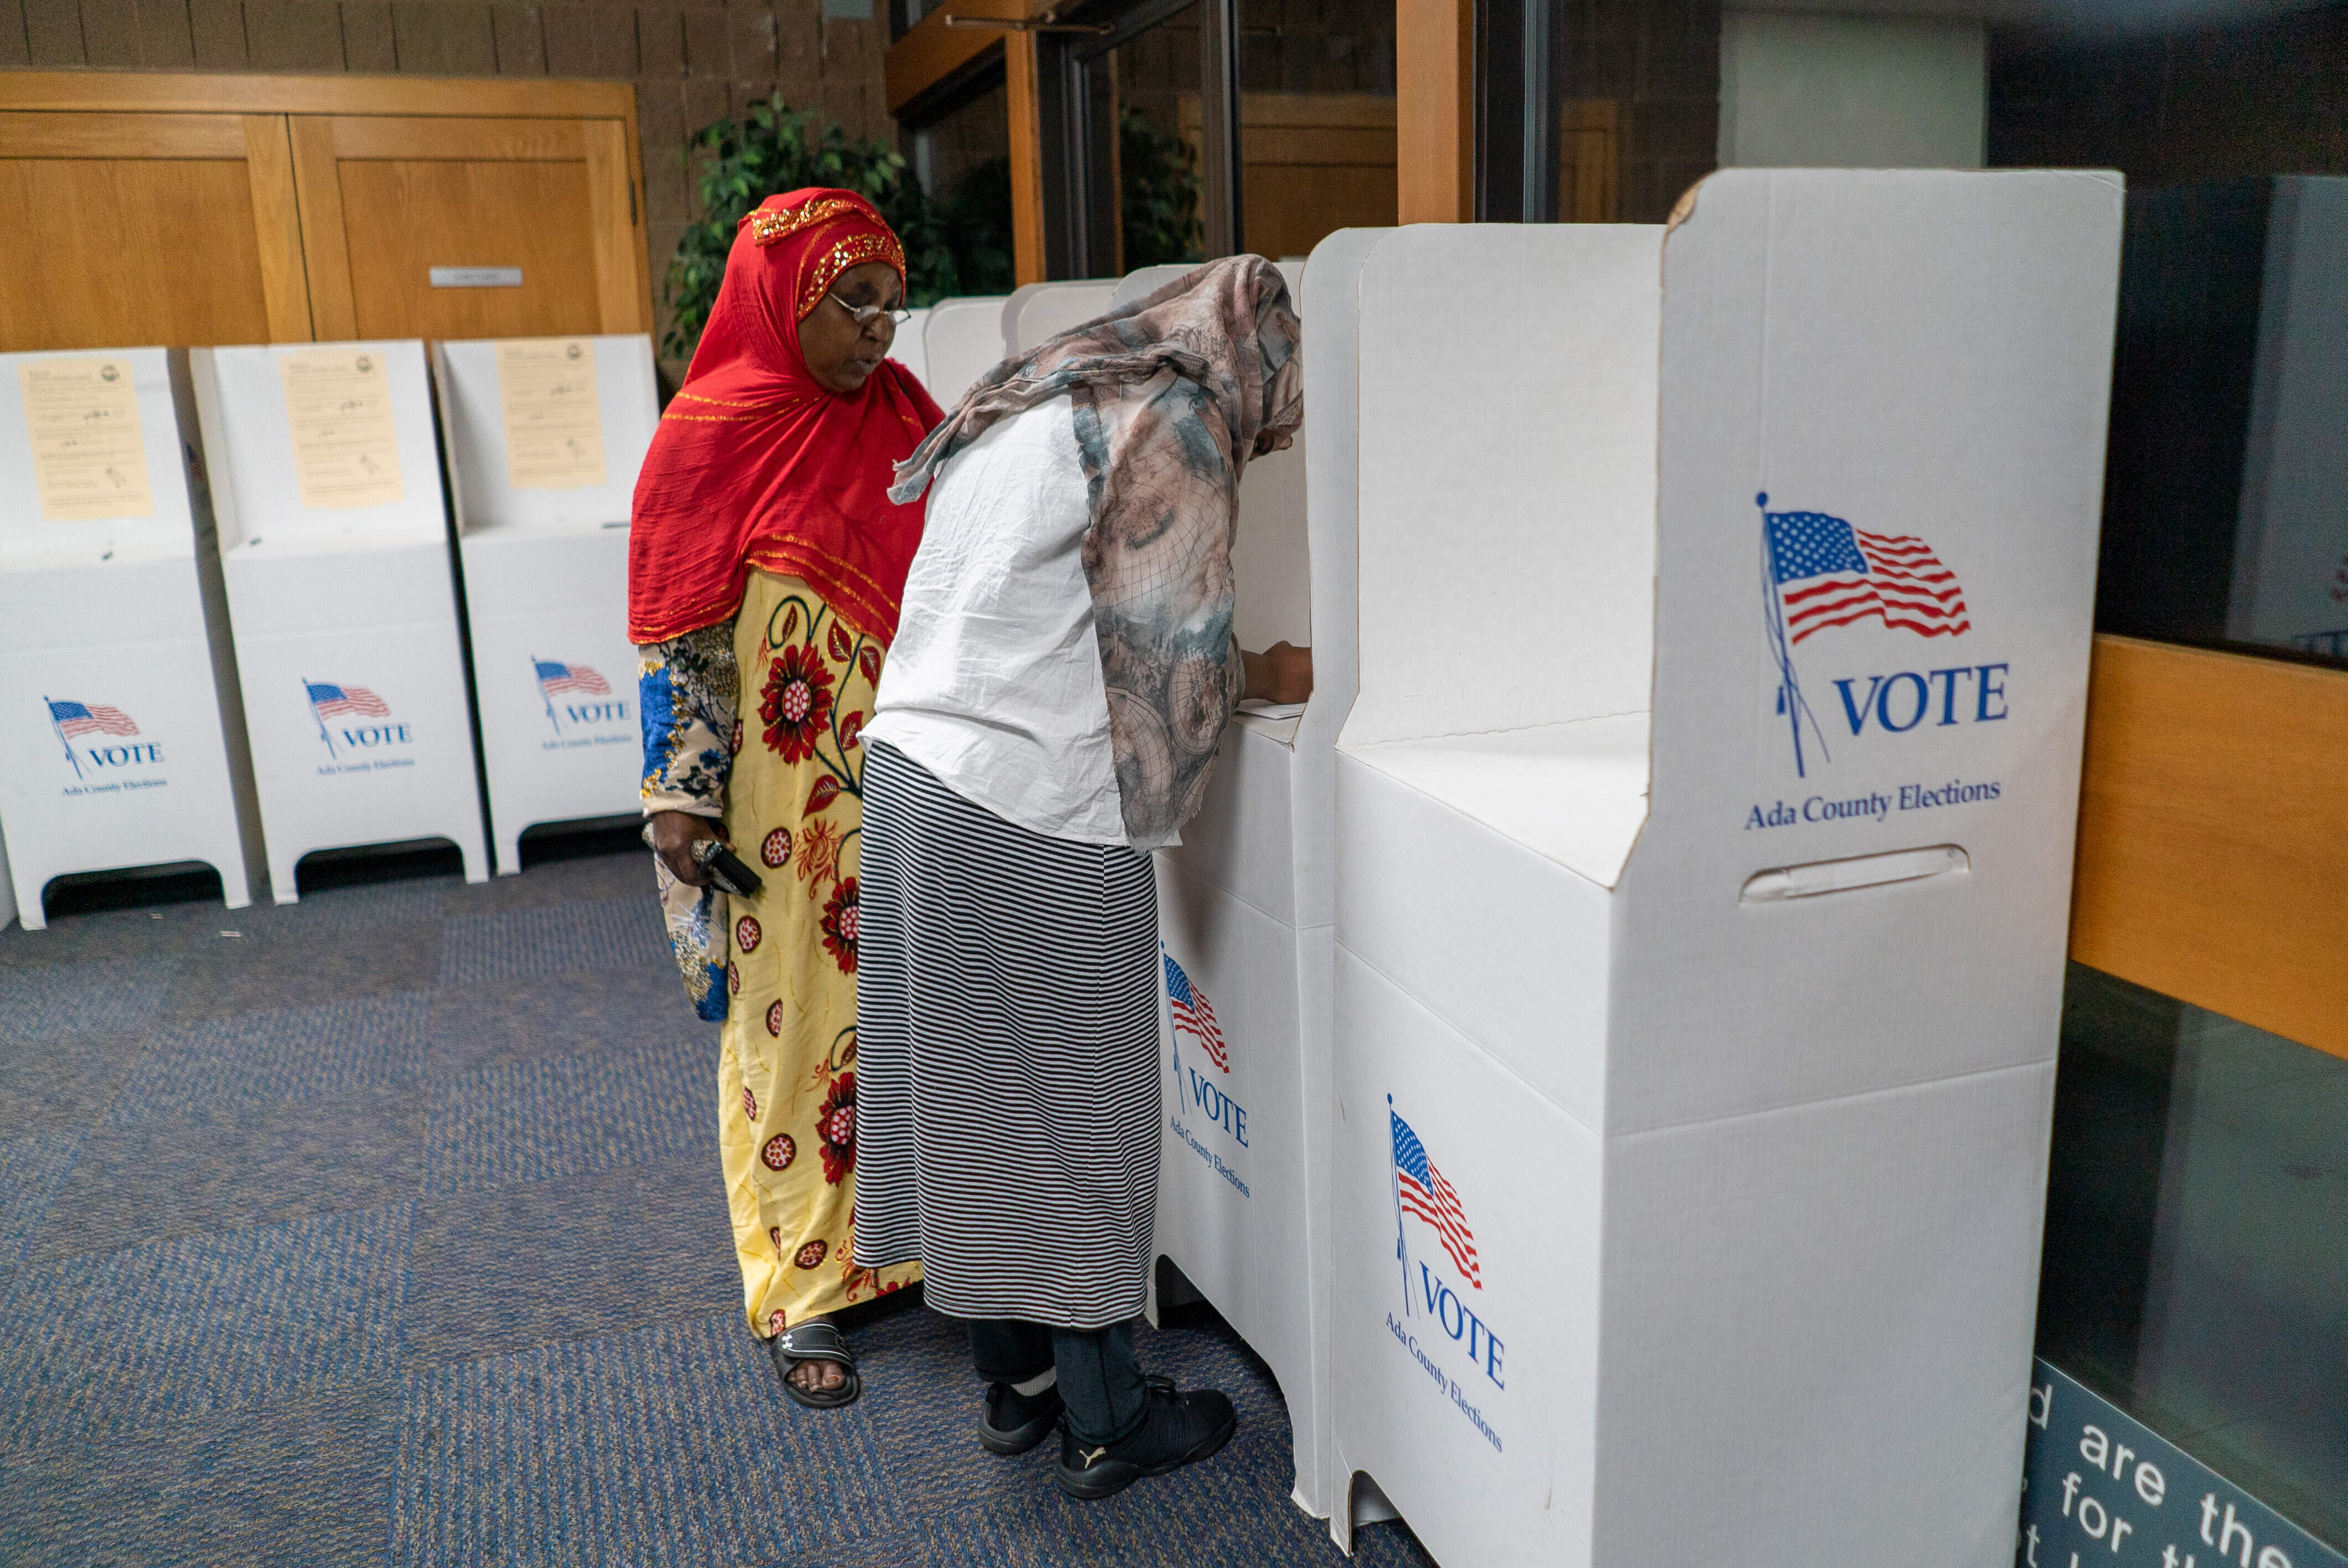 Two woman vote in an election in Boise, Idaho. One is filling out her ballot in a privacy booth while the other stands next to her. 